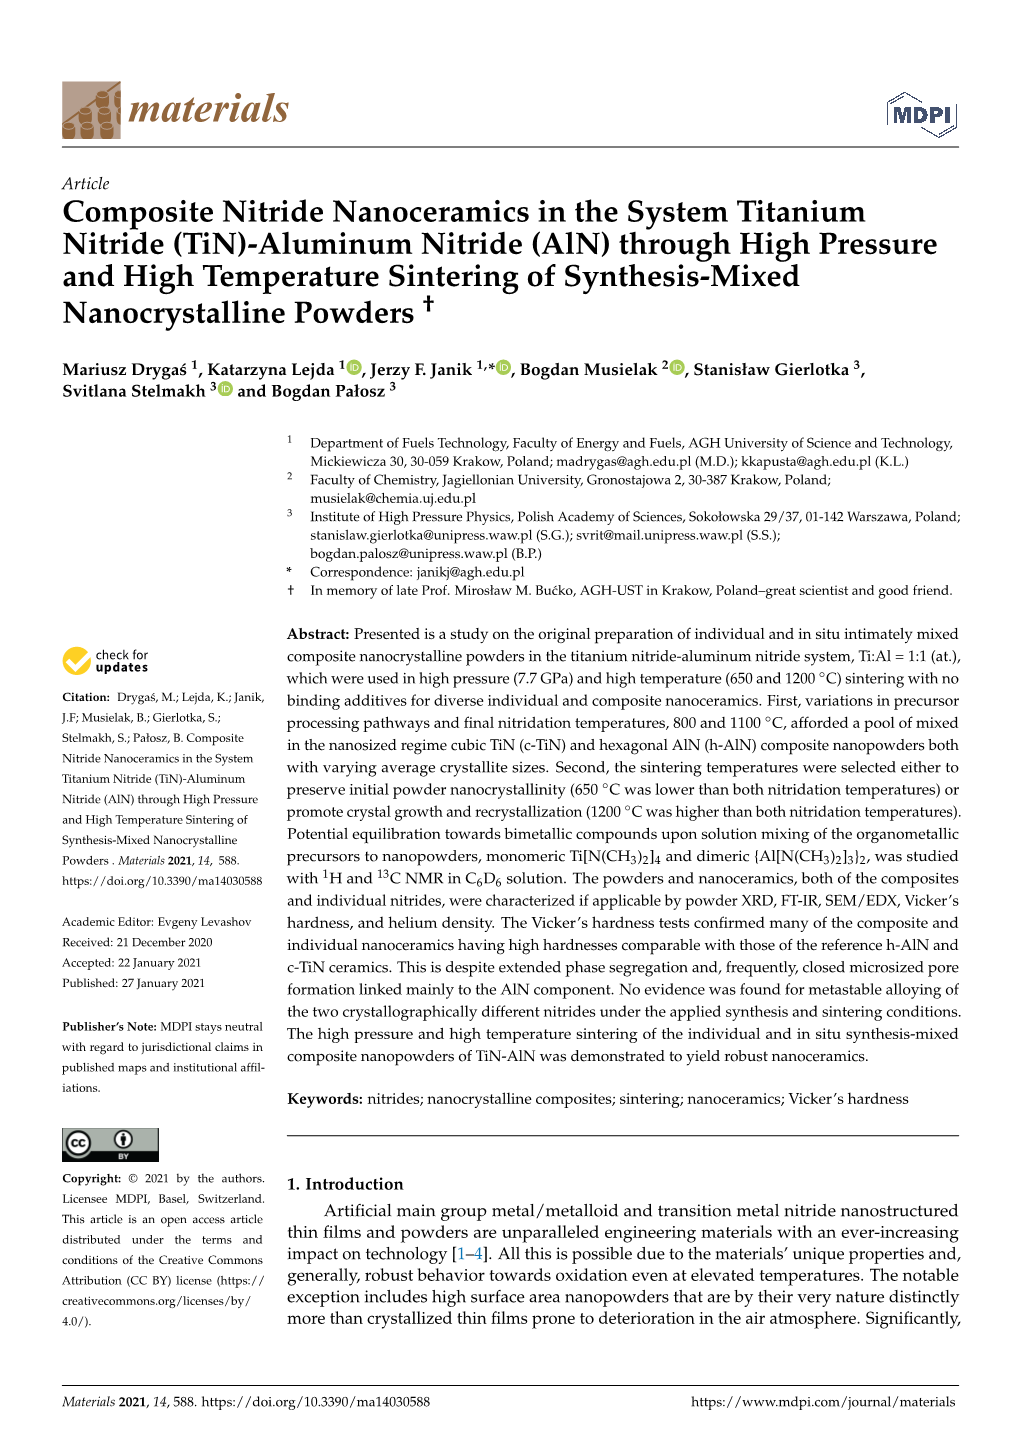 (Tin)-Aluminum Nitride (Aln) Through High Pressure and High Temperature Sintering of Synthesis-Mixed Nanocrystalline Powders †